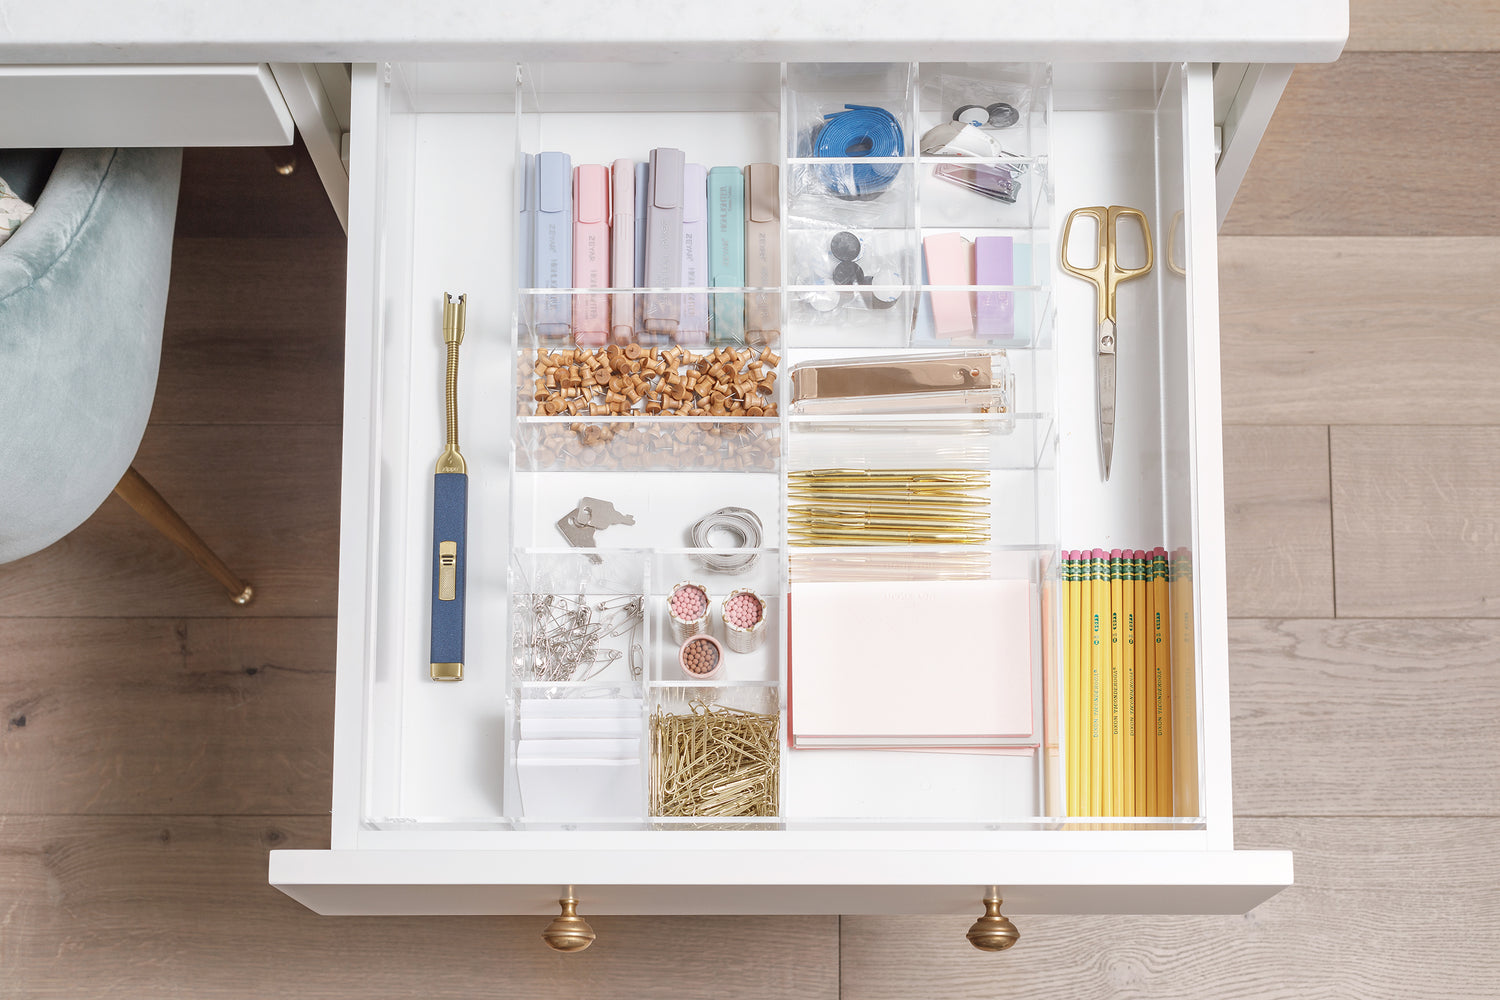 Perfectly organized drawer full of office supplies including pencils, notepads, and paper clips.